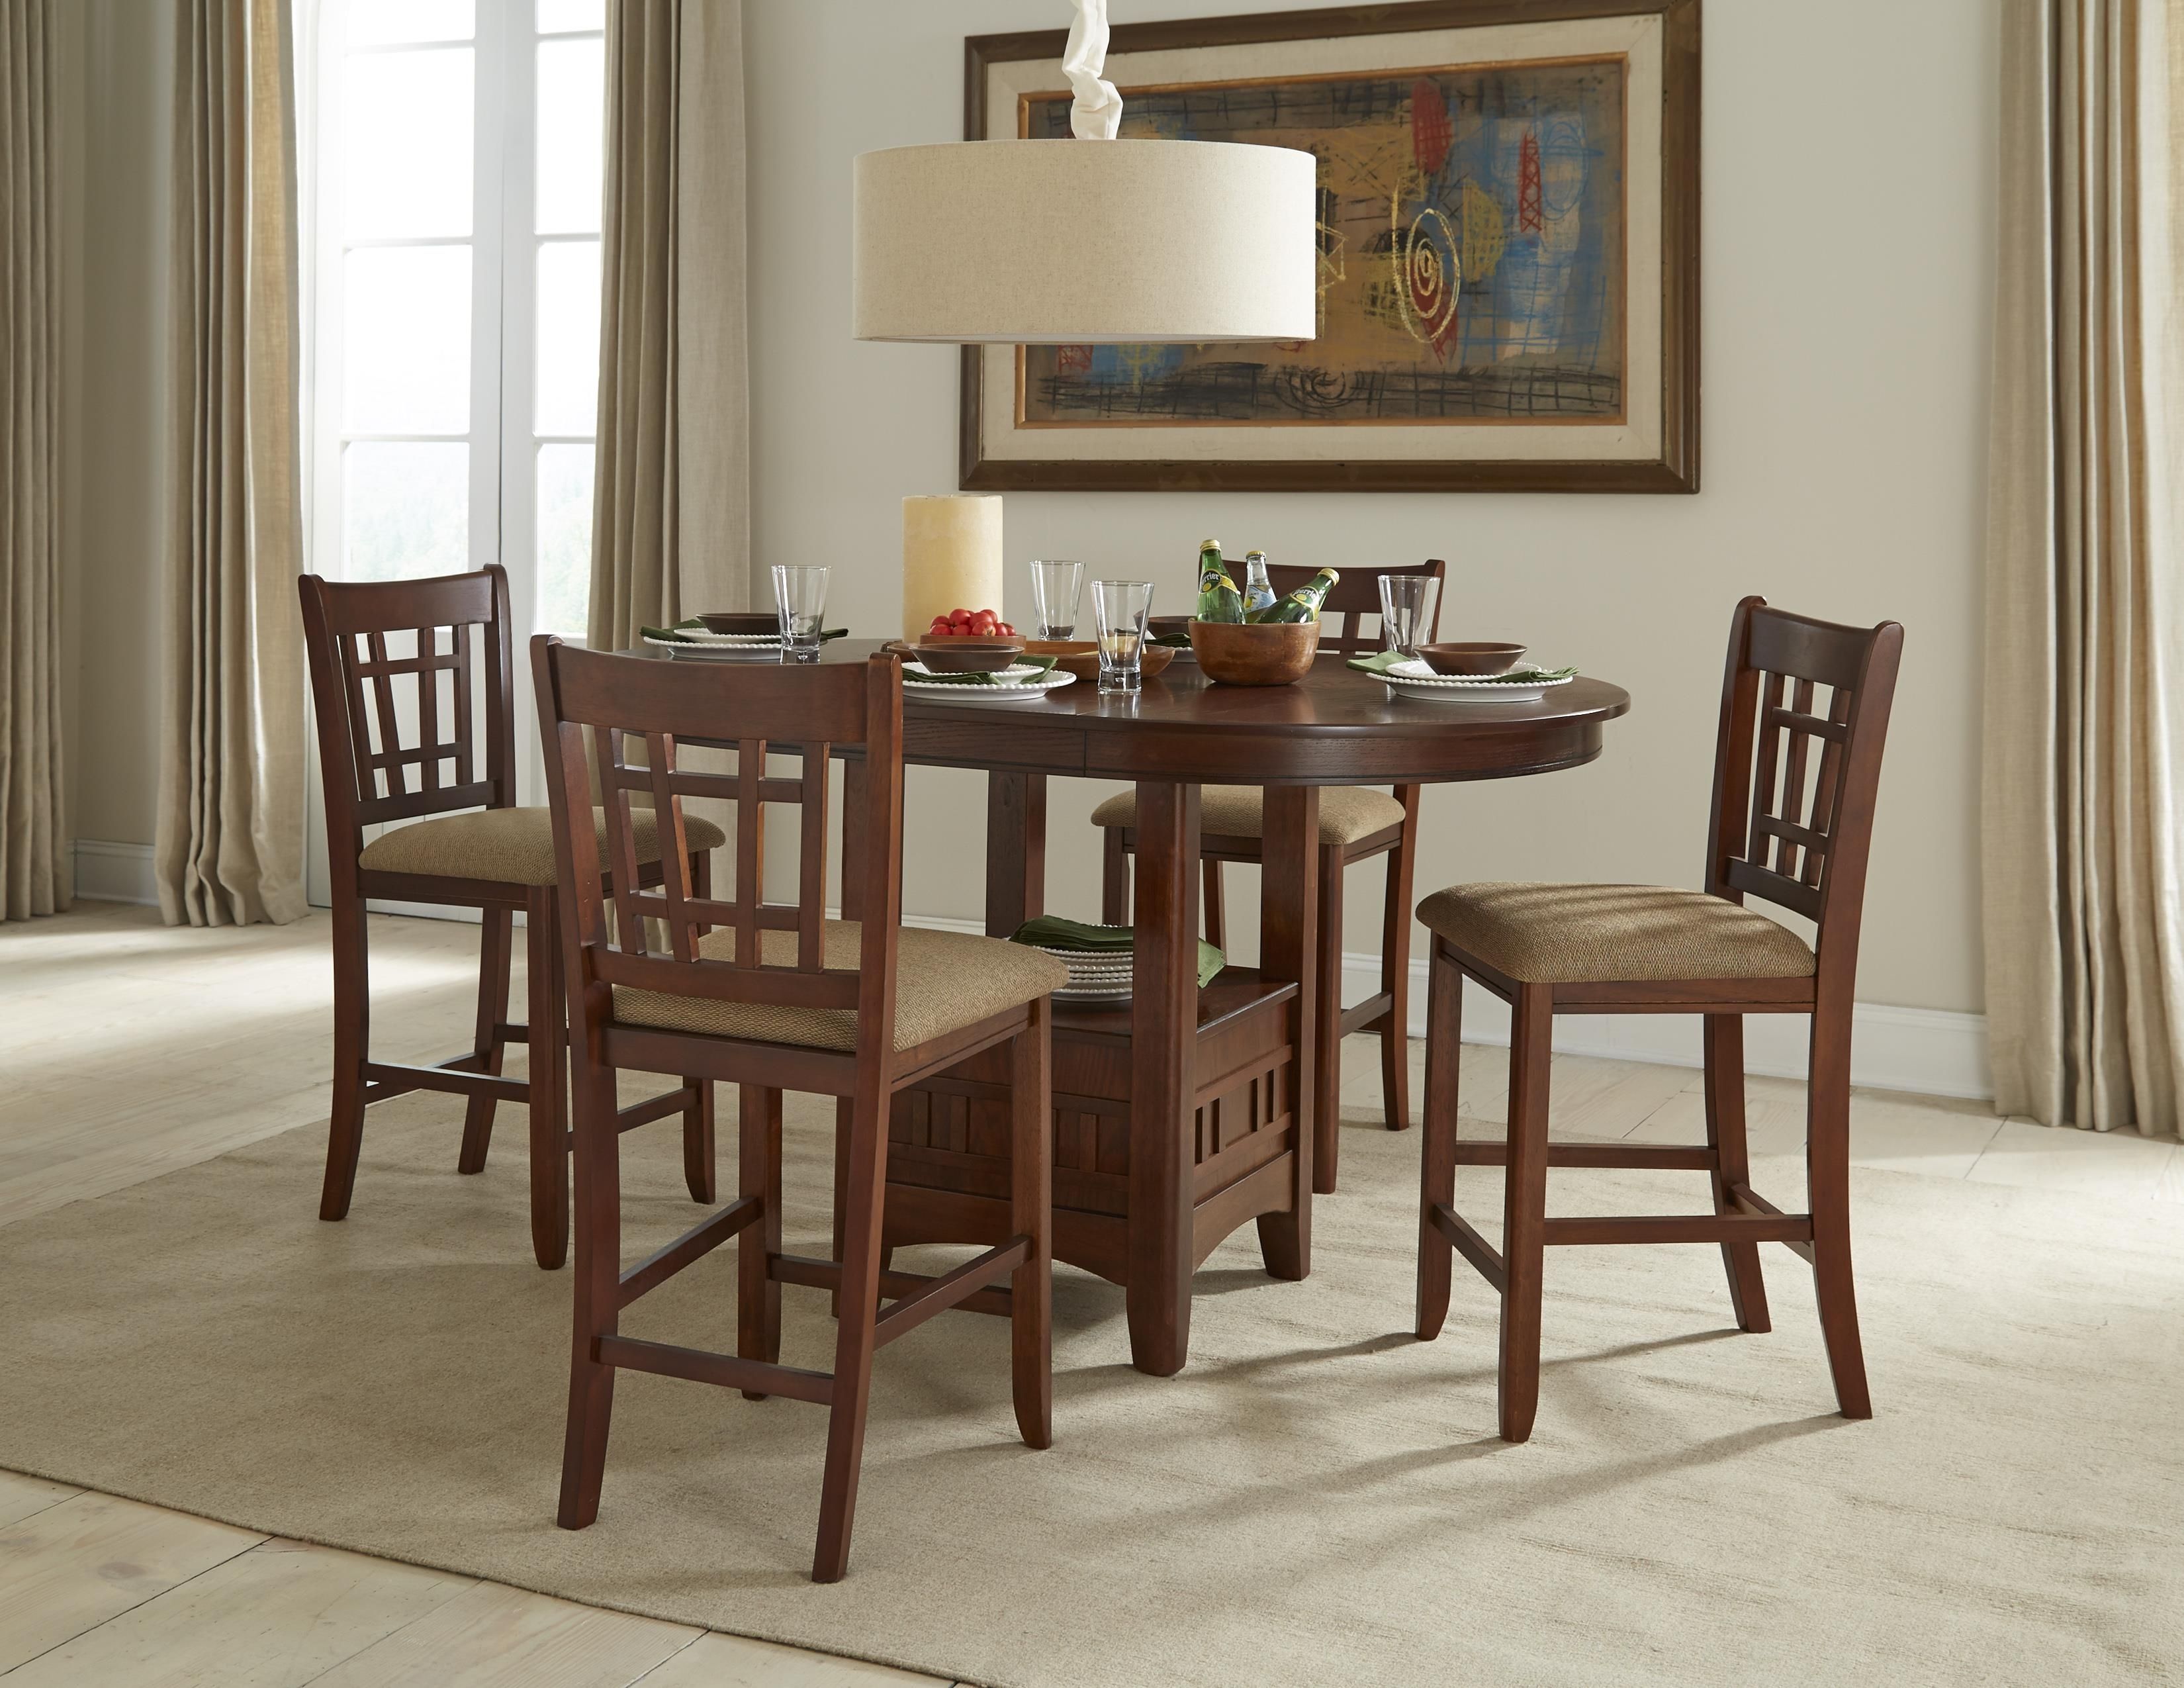 Intercon Mission Casuals 5 Piece Gathering Set | Wayside Furniture In Most Current Market 5 Piece Counter Sets (Photo 3 of 20)